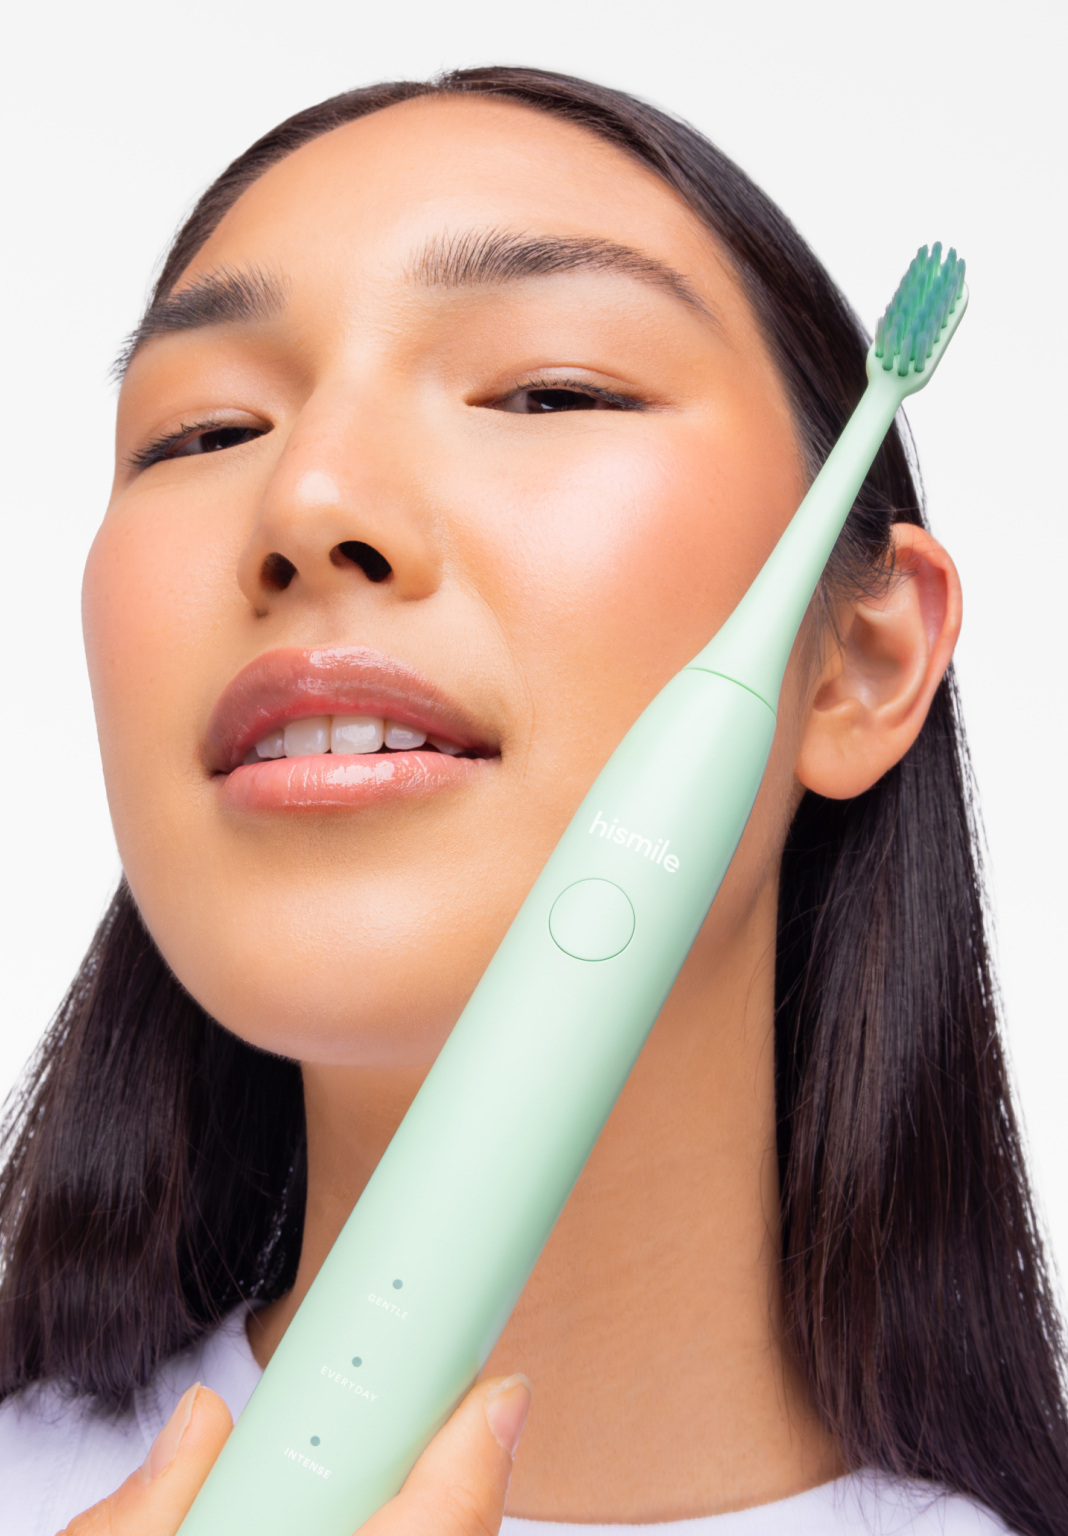 Hismile Green Electric Toothbrush 1 st